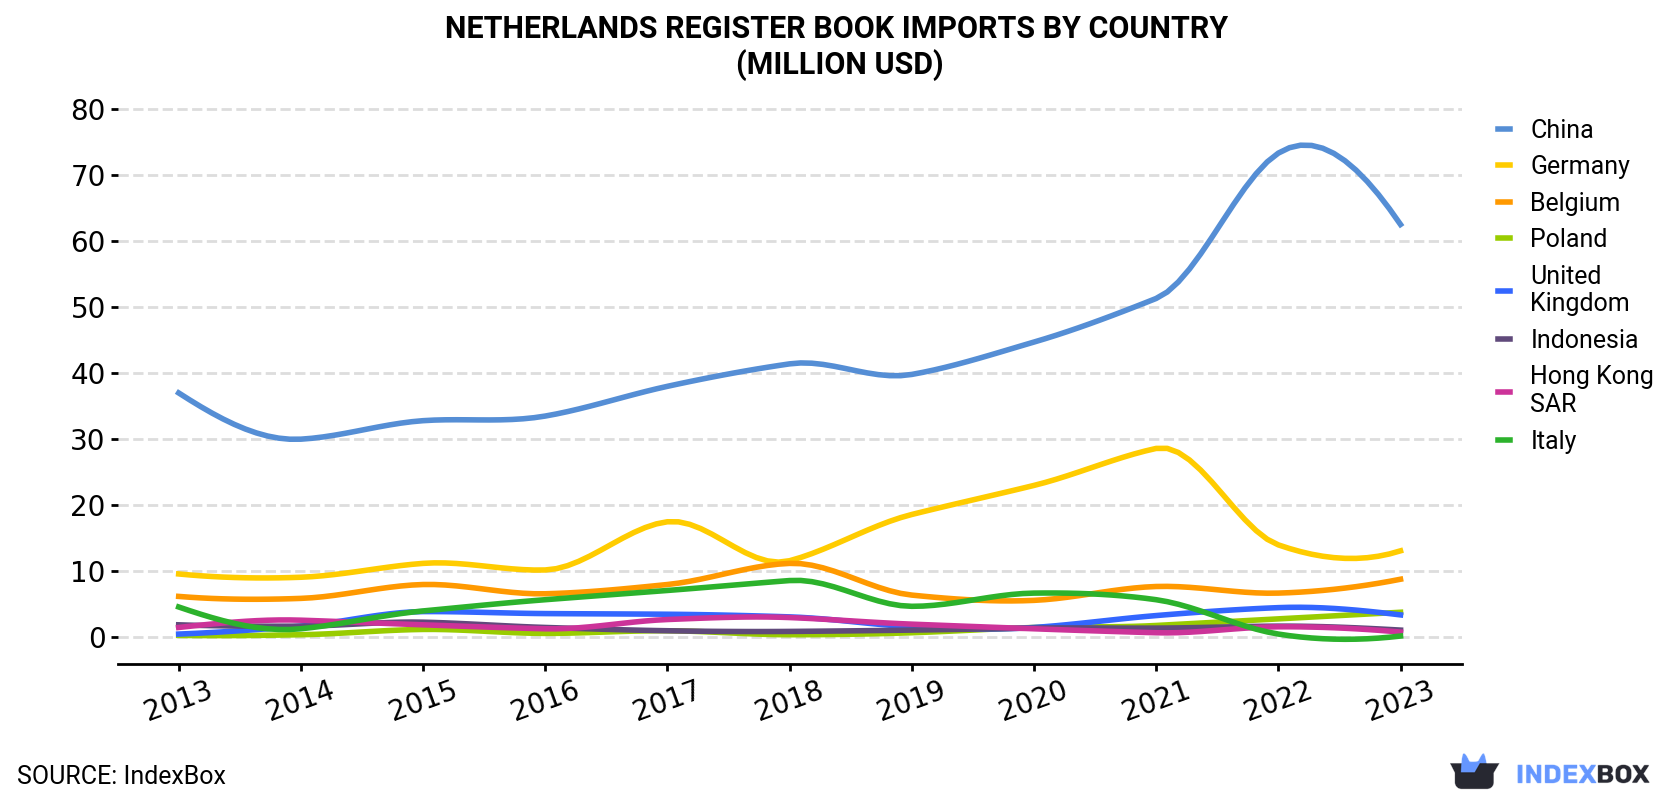 Netherlands Register Book Imports By Country (Million USD)